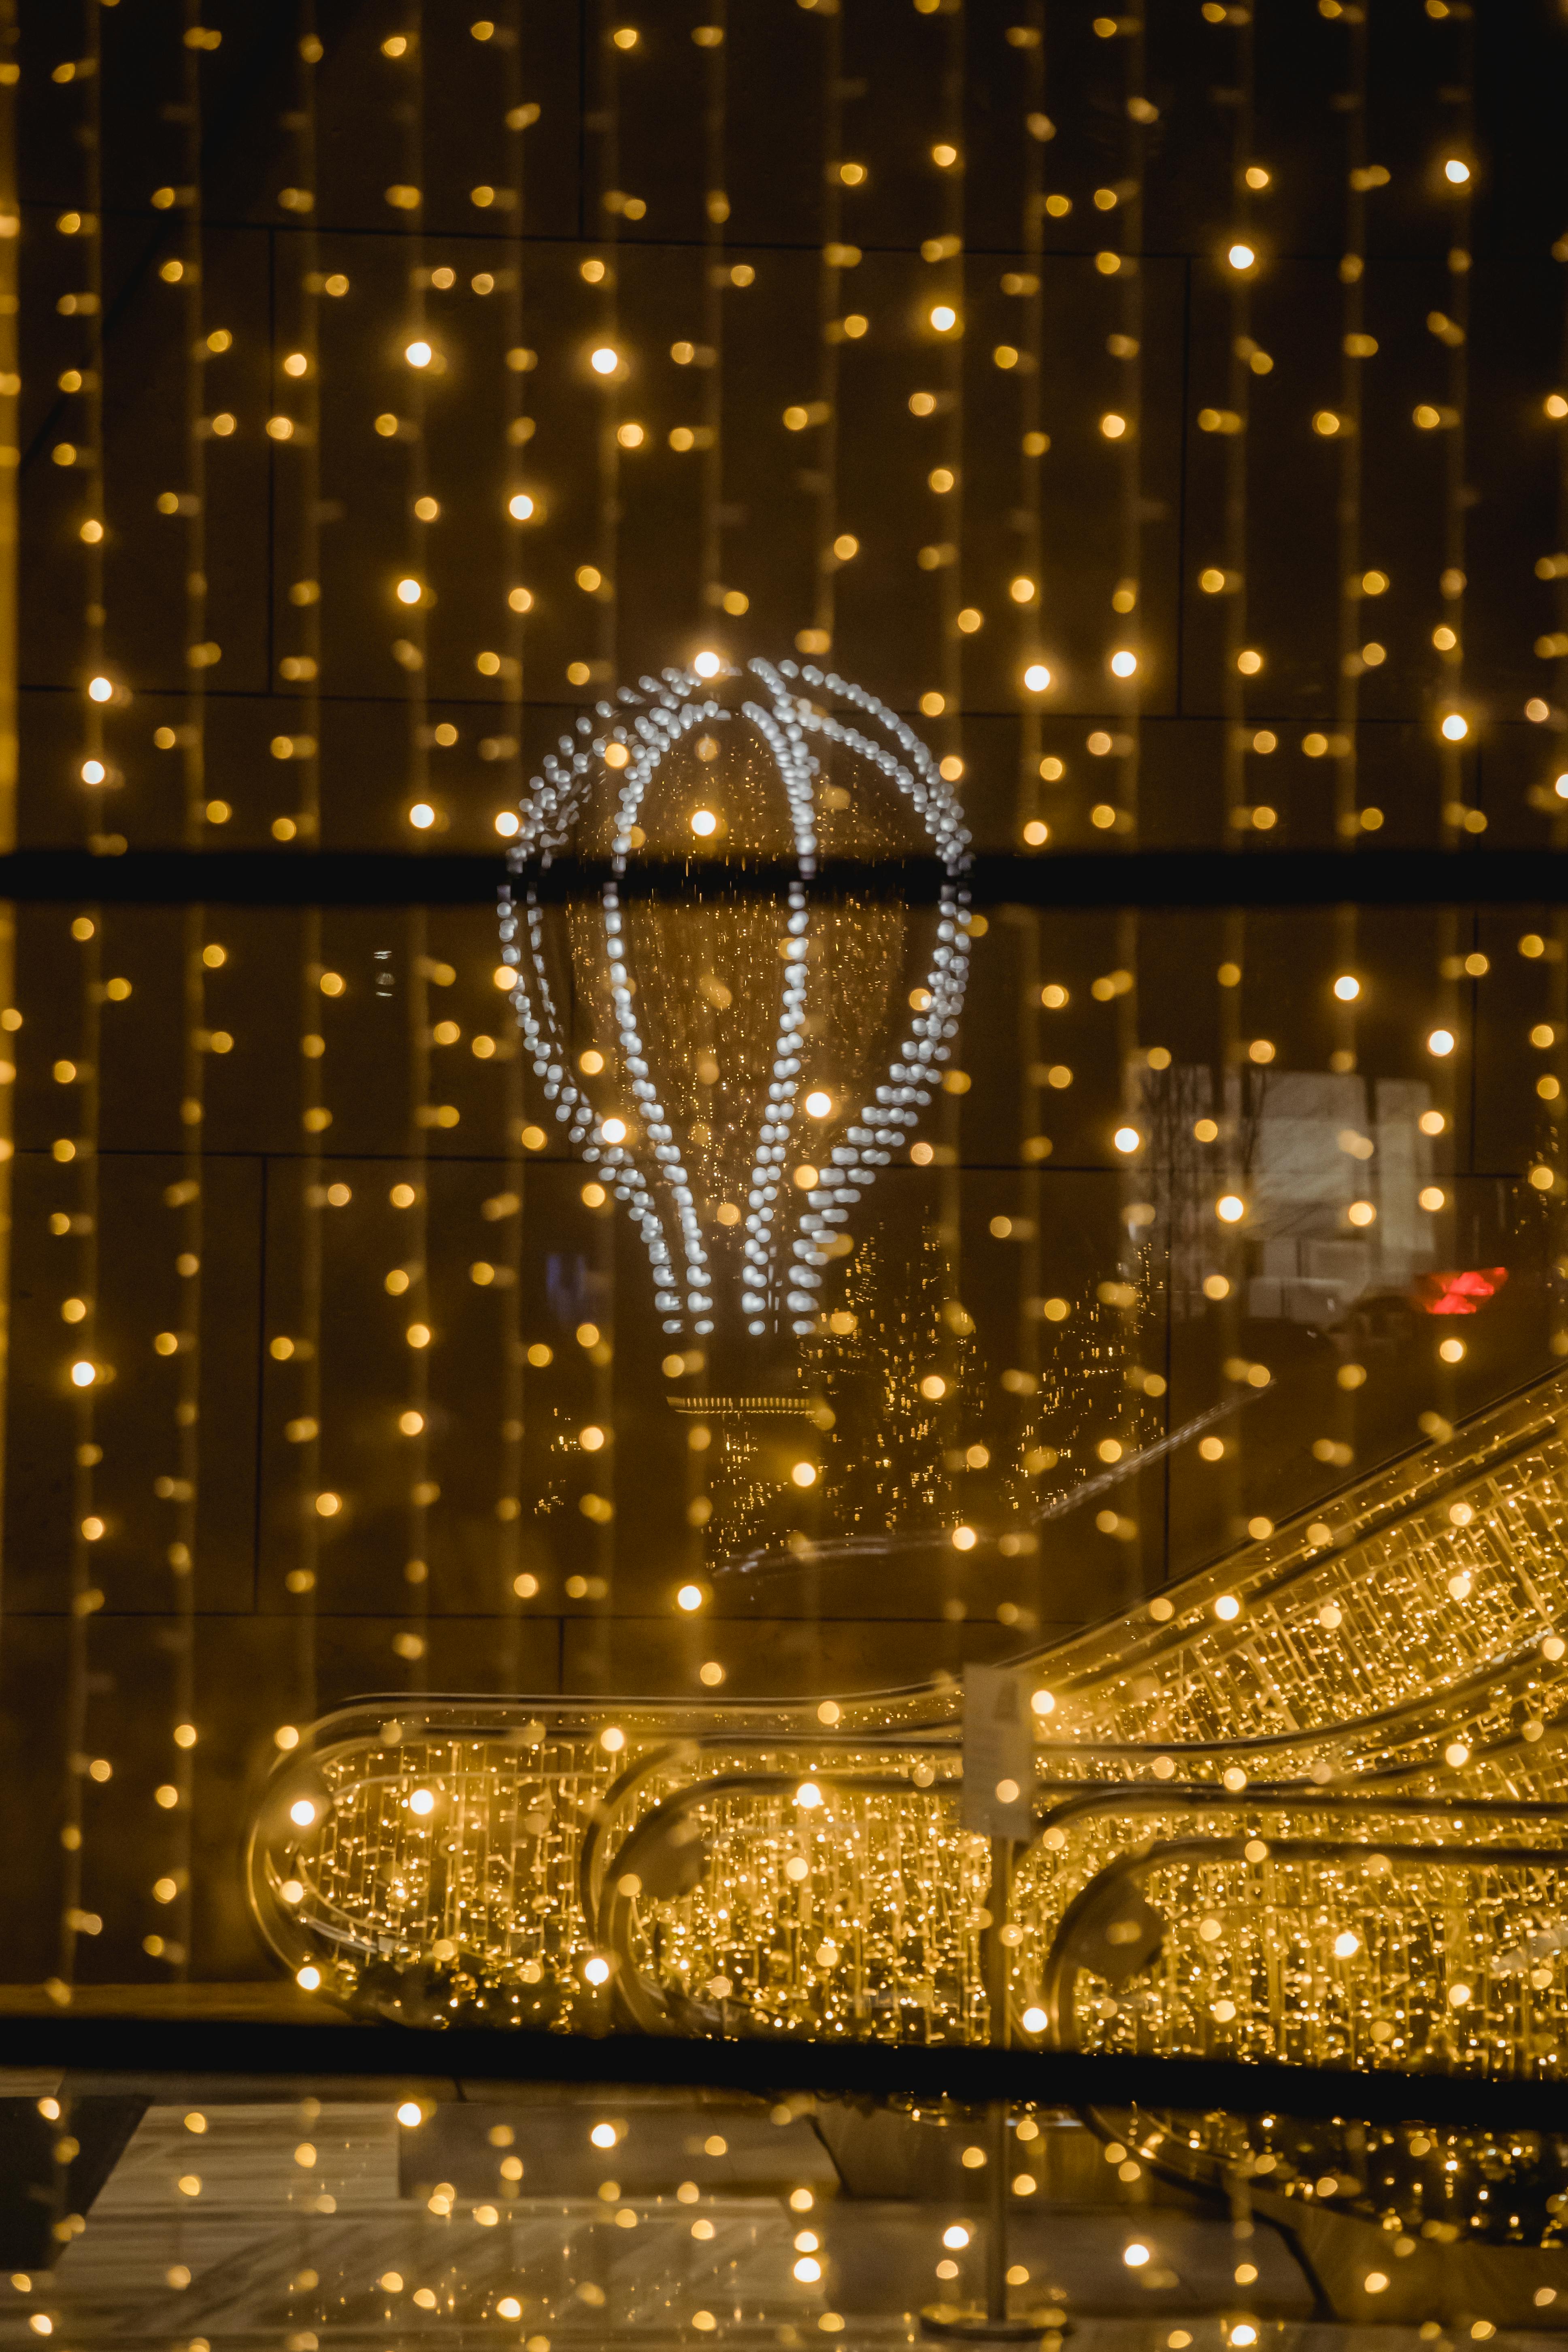 glowing bright air balloon among sparkling garlands in shopping center